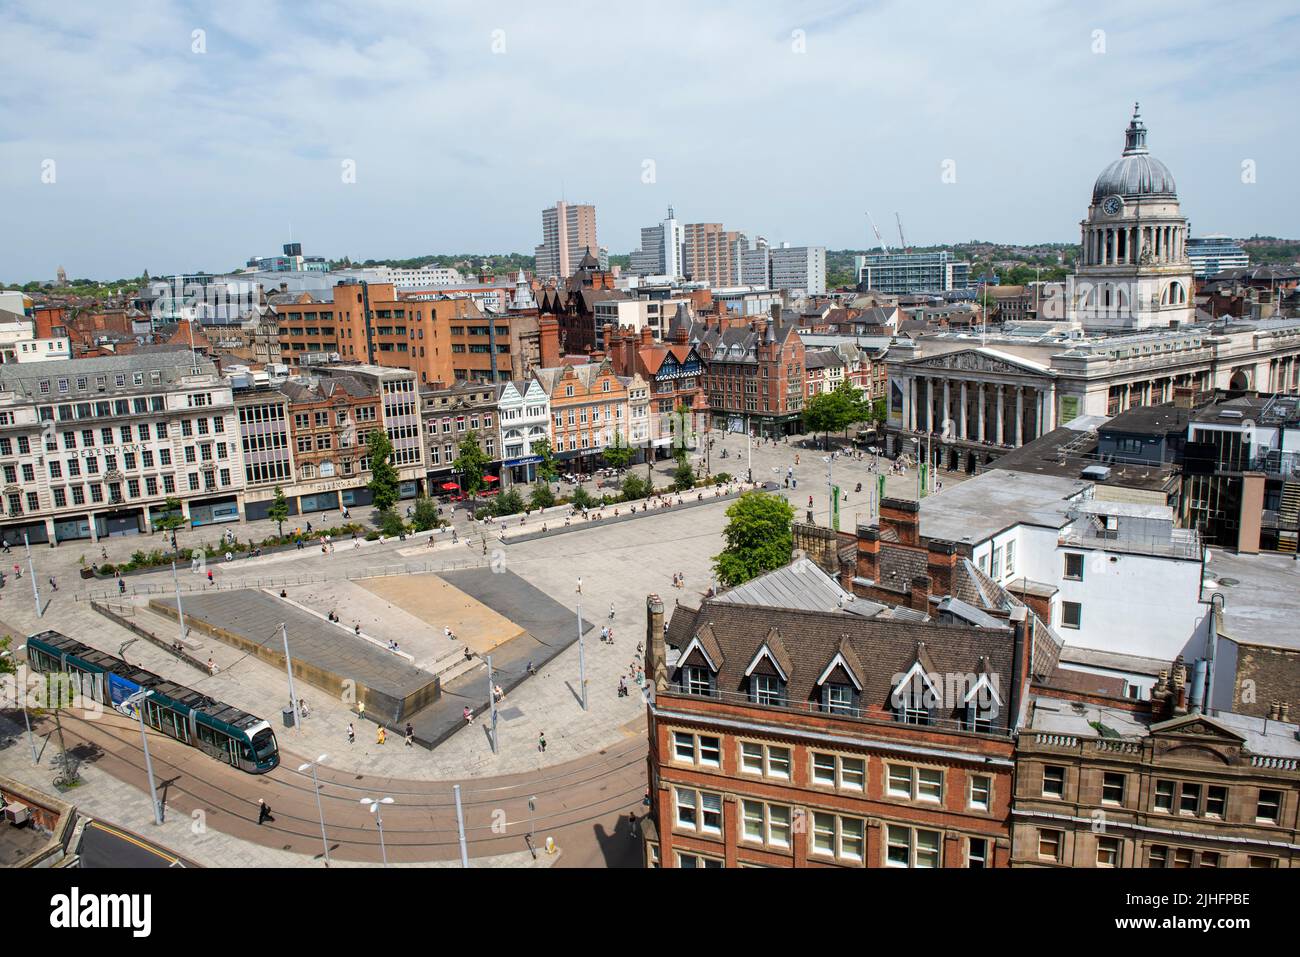 Aerial view of Market Square from the rooftop of the Pearl Assurance Building in Nottingham City, Nottinghamshire England UK Stock Photo